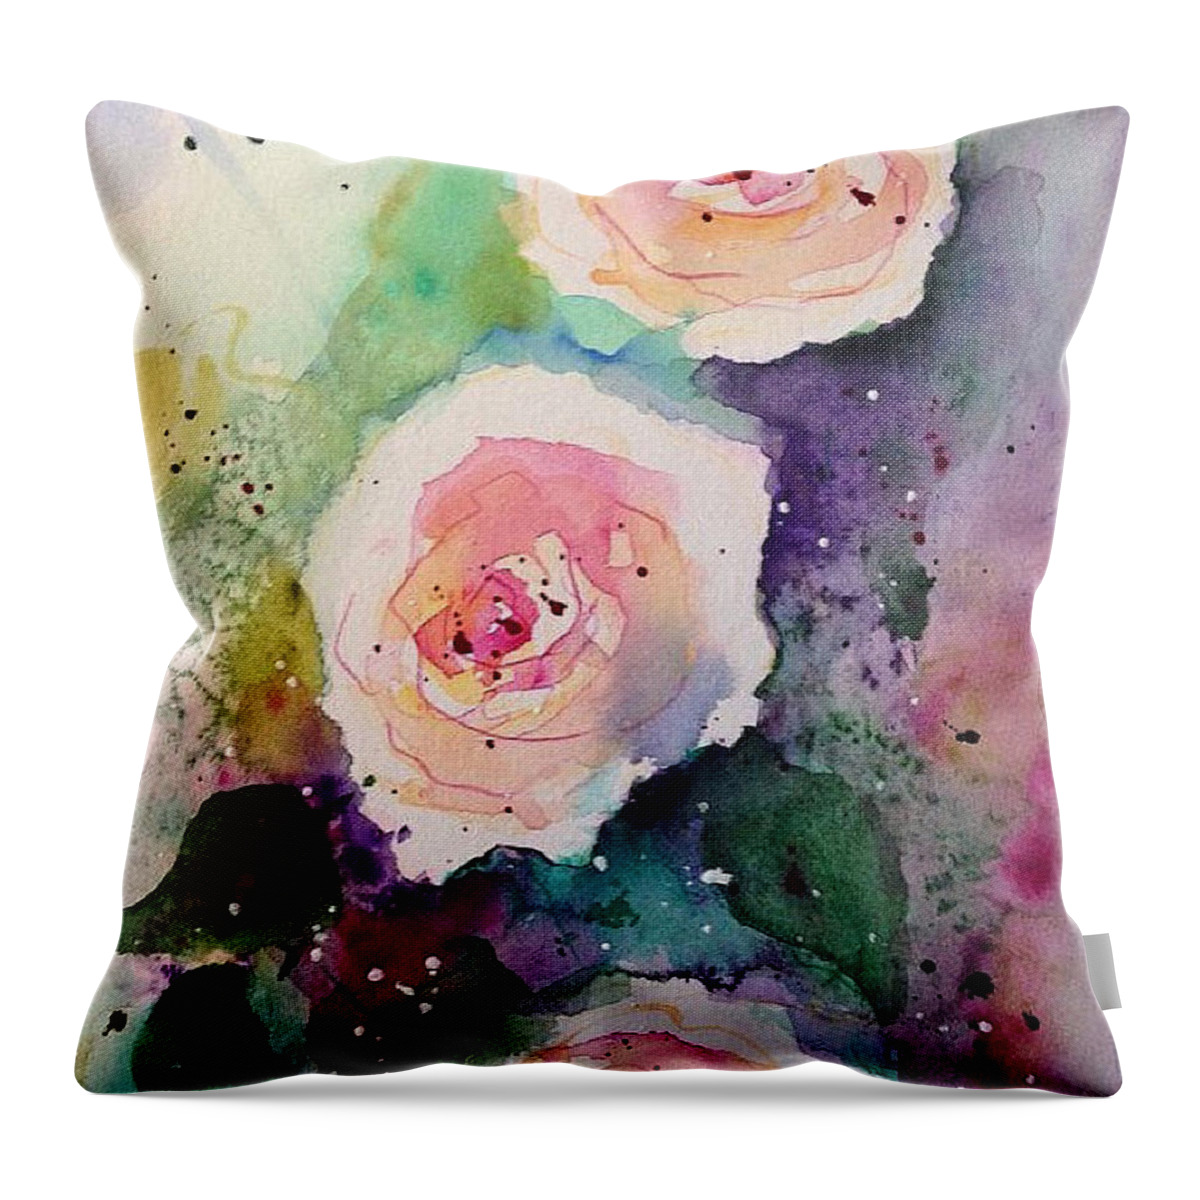 Rose Throw Pillow featuring the painting Roses by Britta Zehm